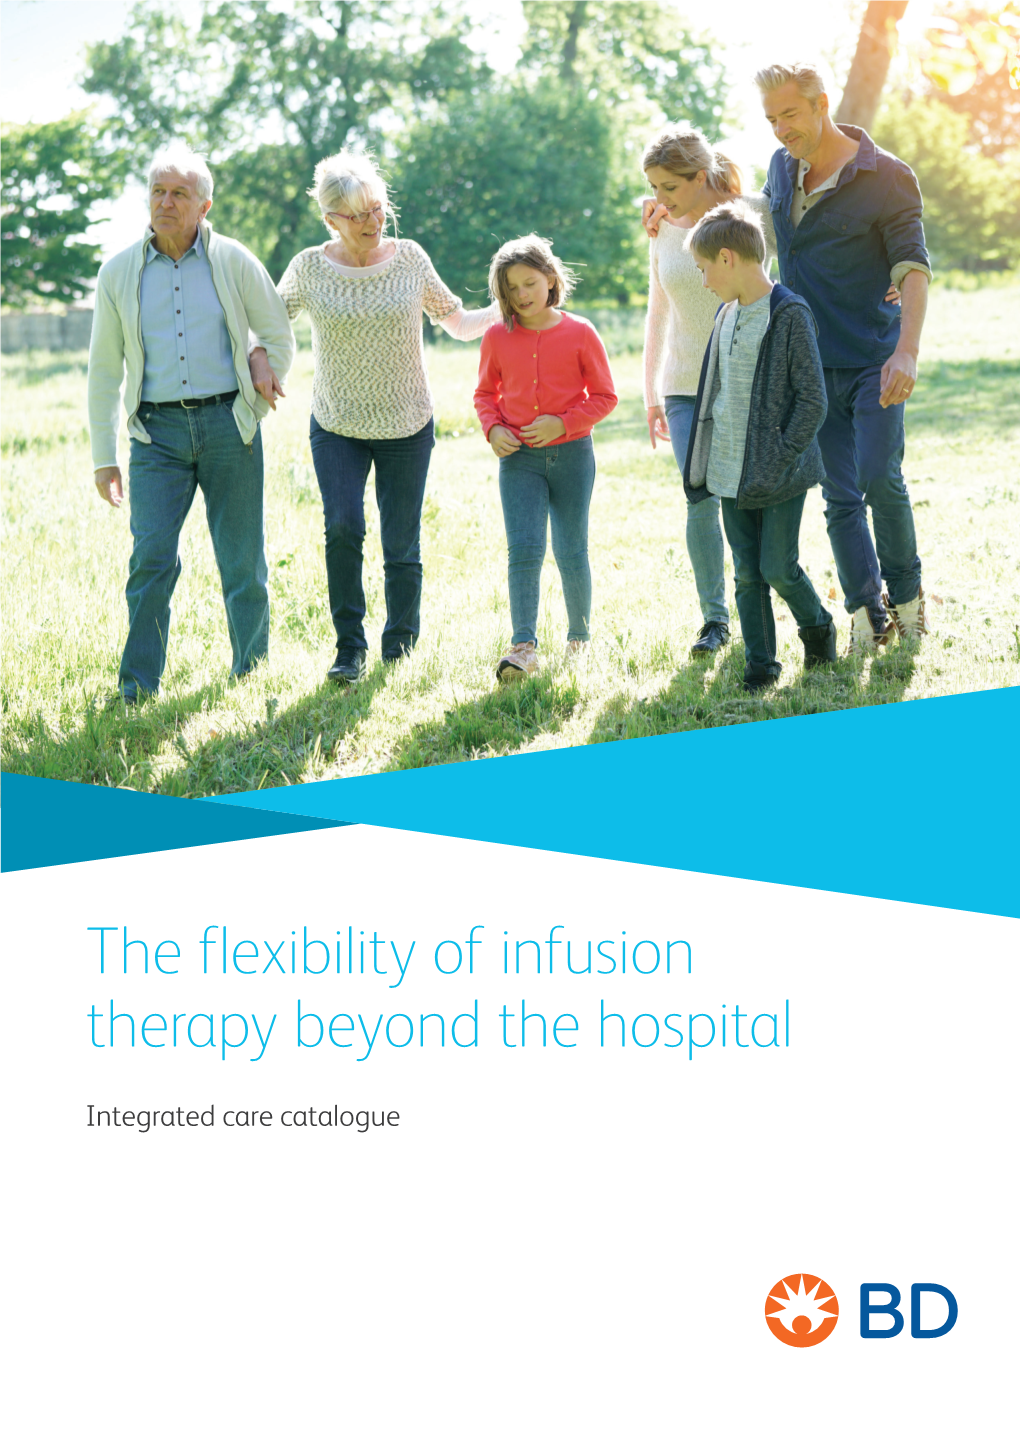 Integrated Care Catalogue Adapting Treatments, Not Lifestyles